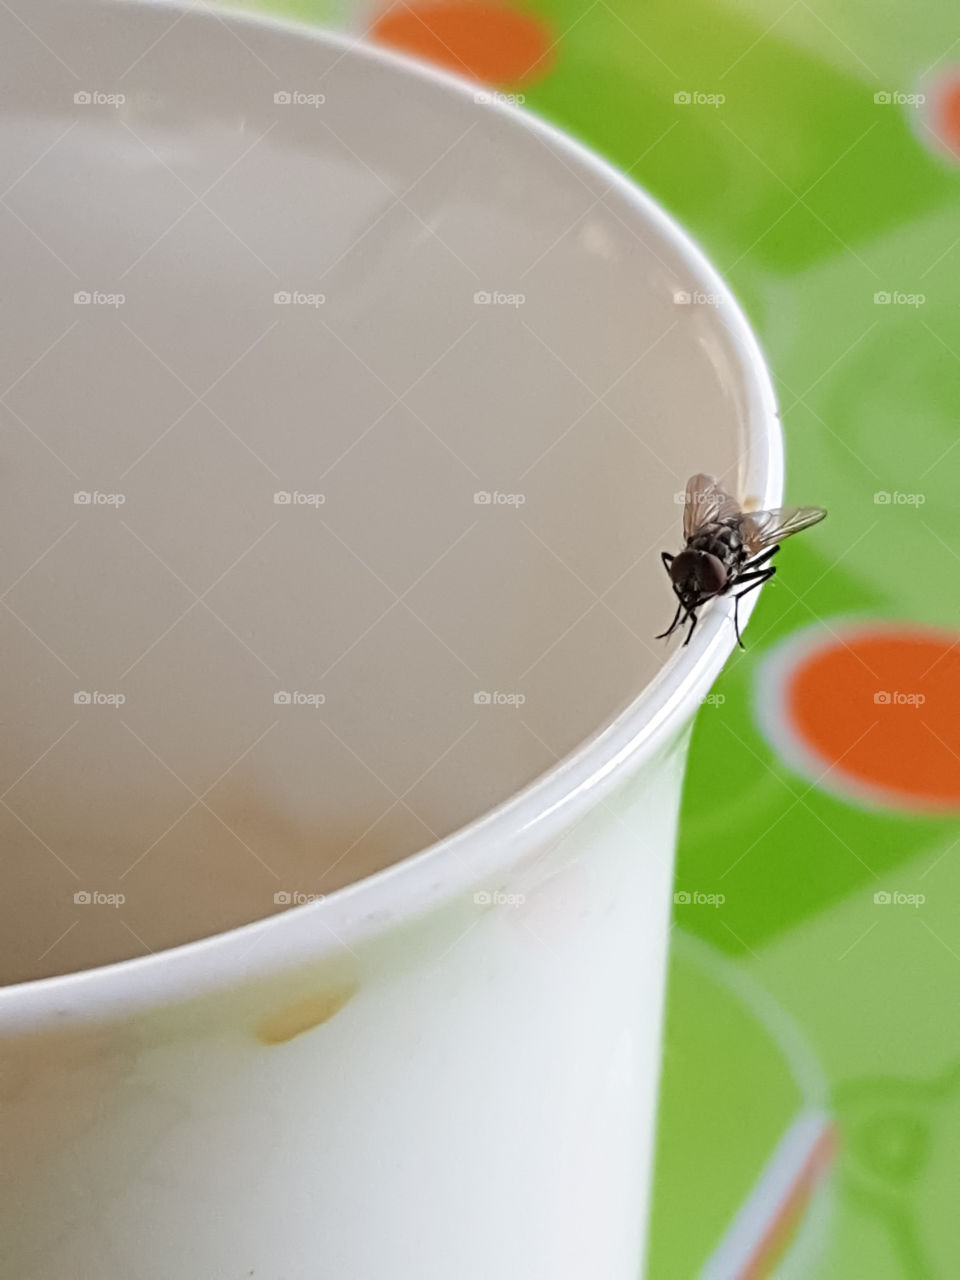 A fly was swarming on the edge of white coffee cup.